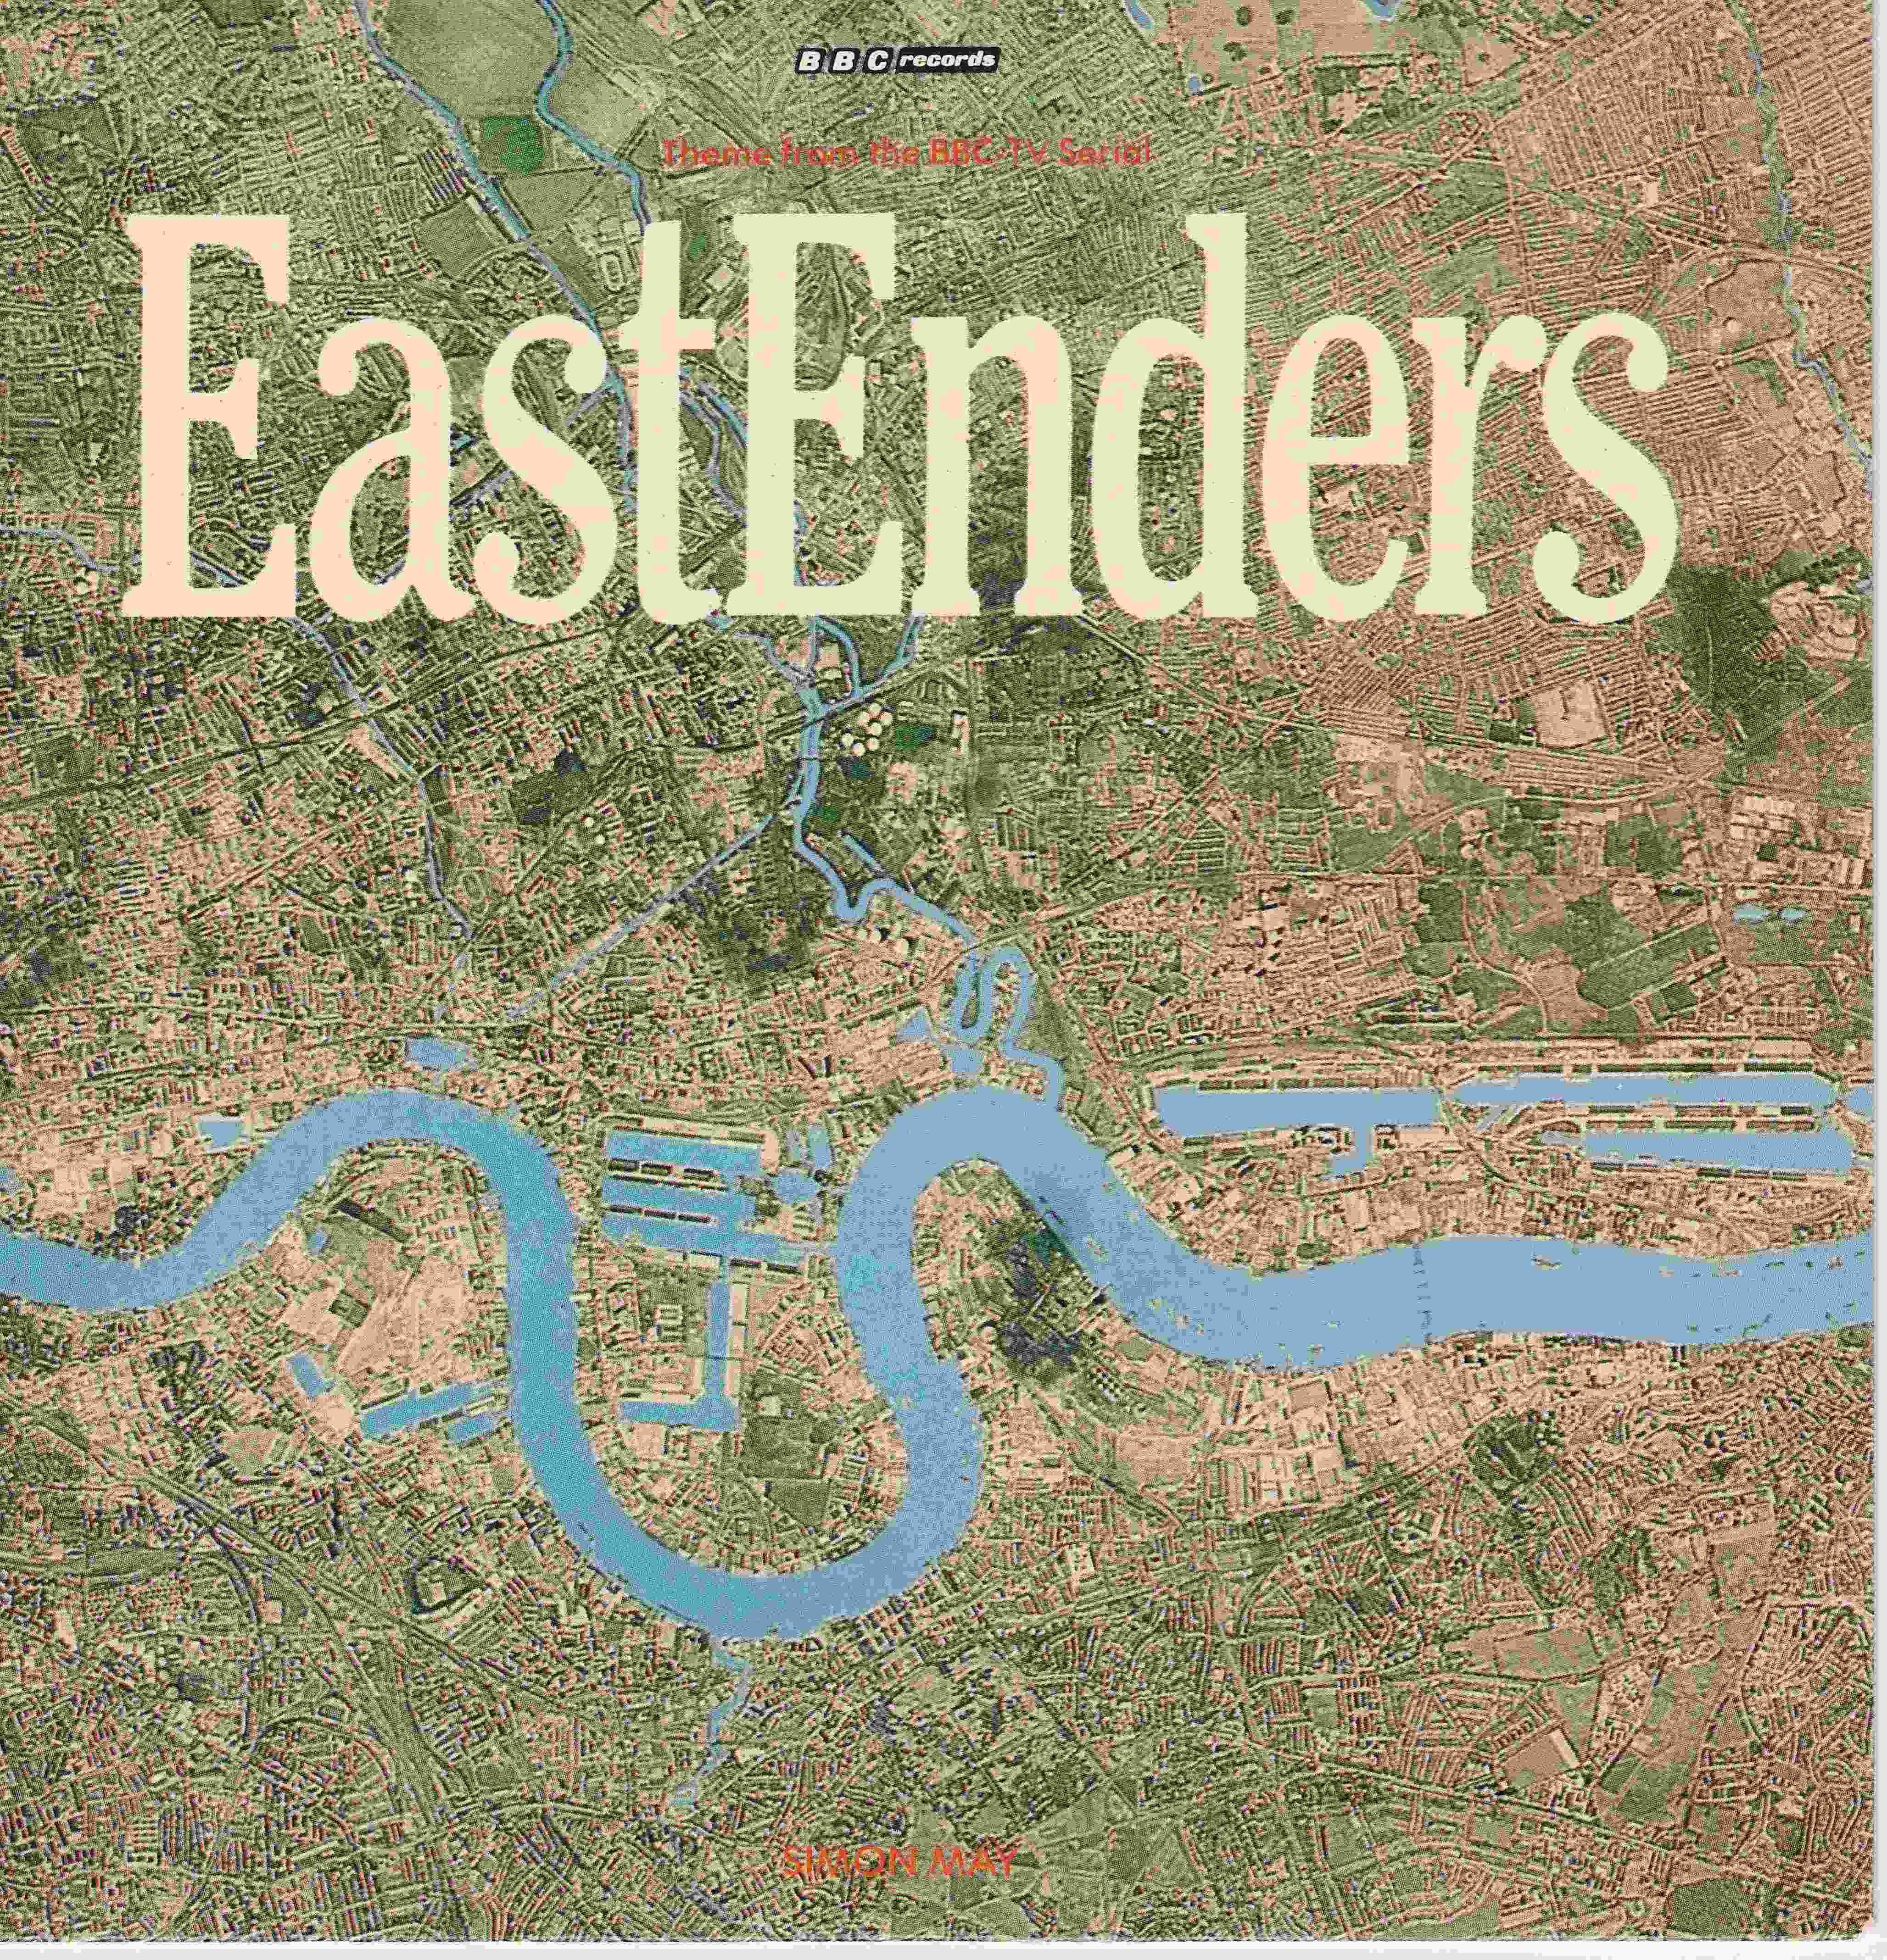 Picture of RESL 160 EastEnders by artist Simon May from the BBC records and Tapes library